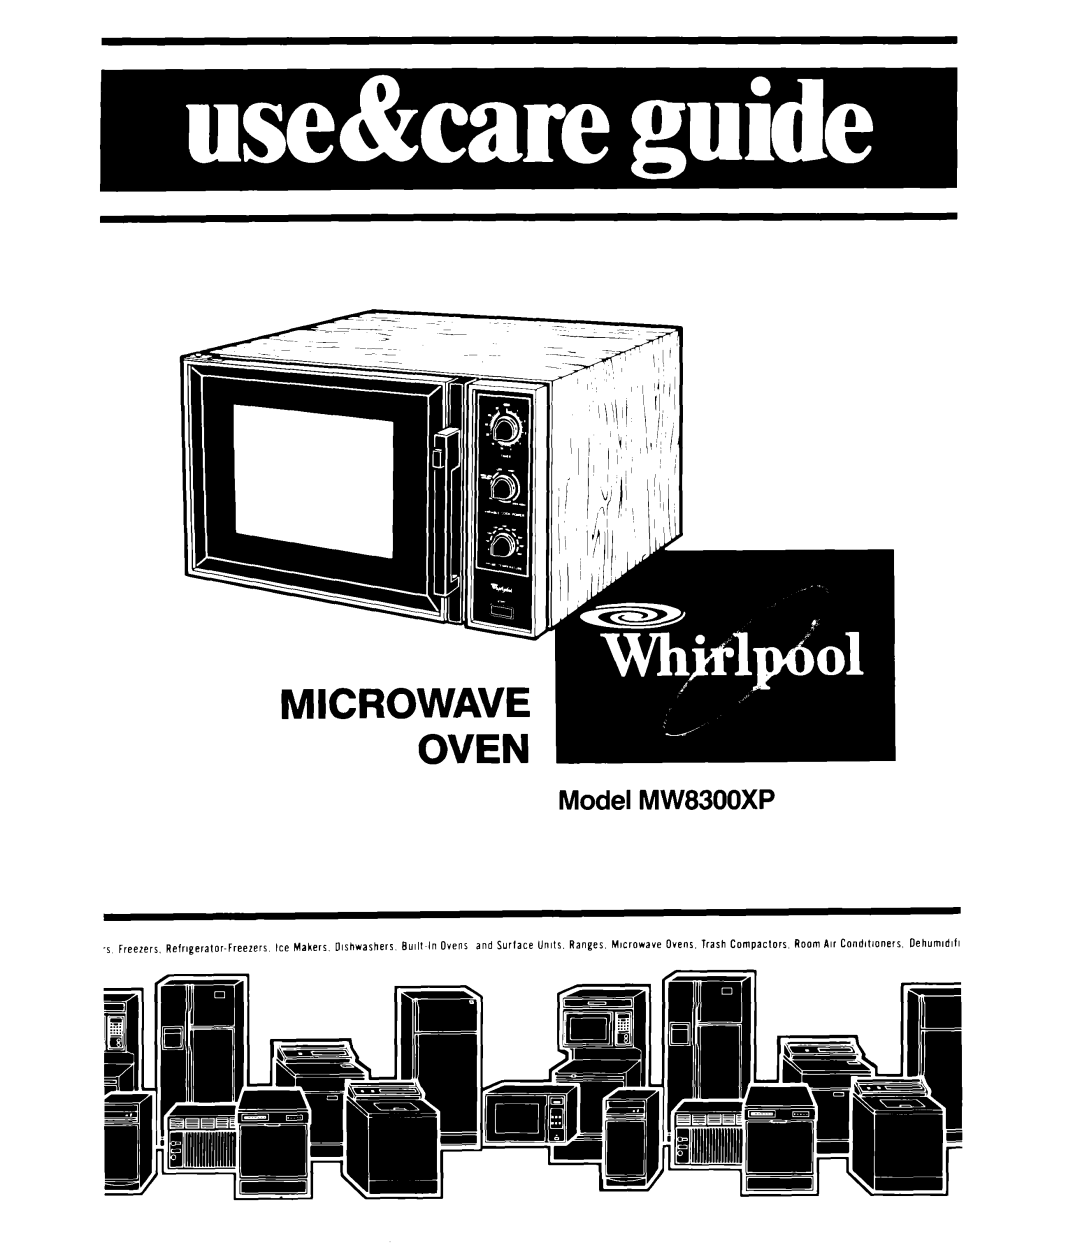 Whirlpool manual Microwave Oven, Model MW8300XP, ice ~ahs, Olshwashers, Bu~lbln Ovens and Surlace 